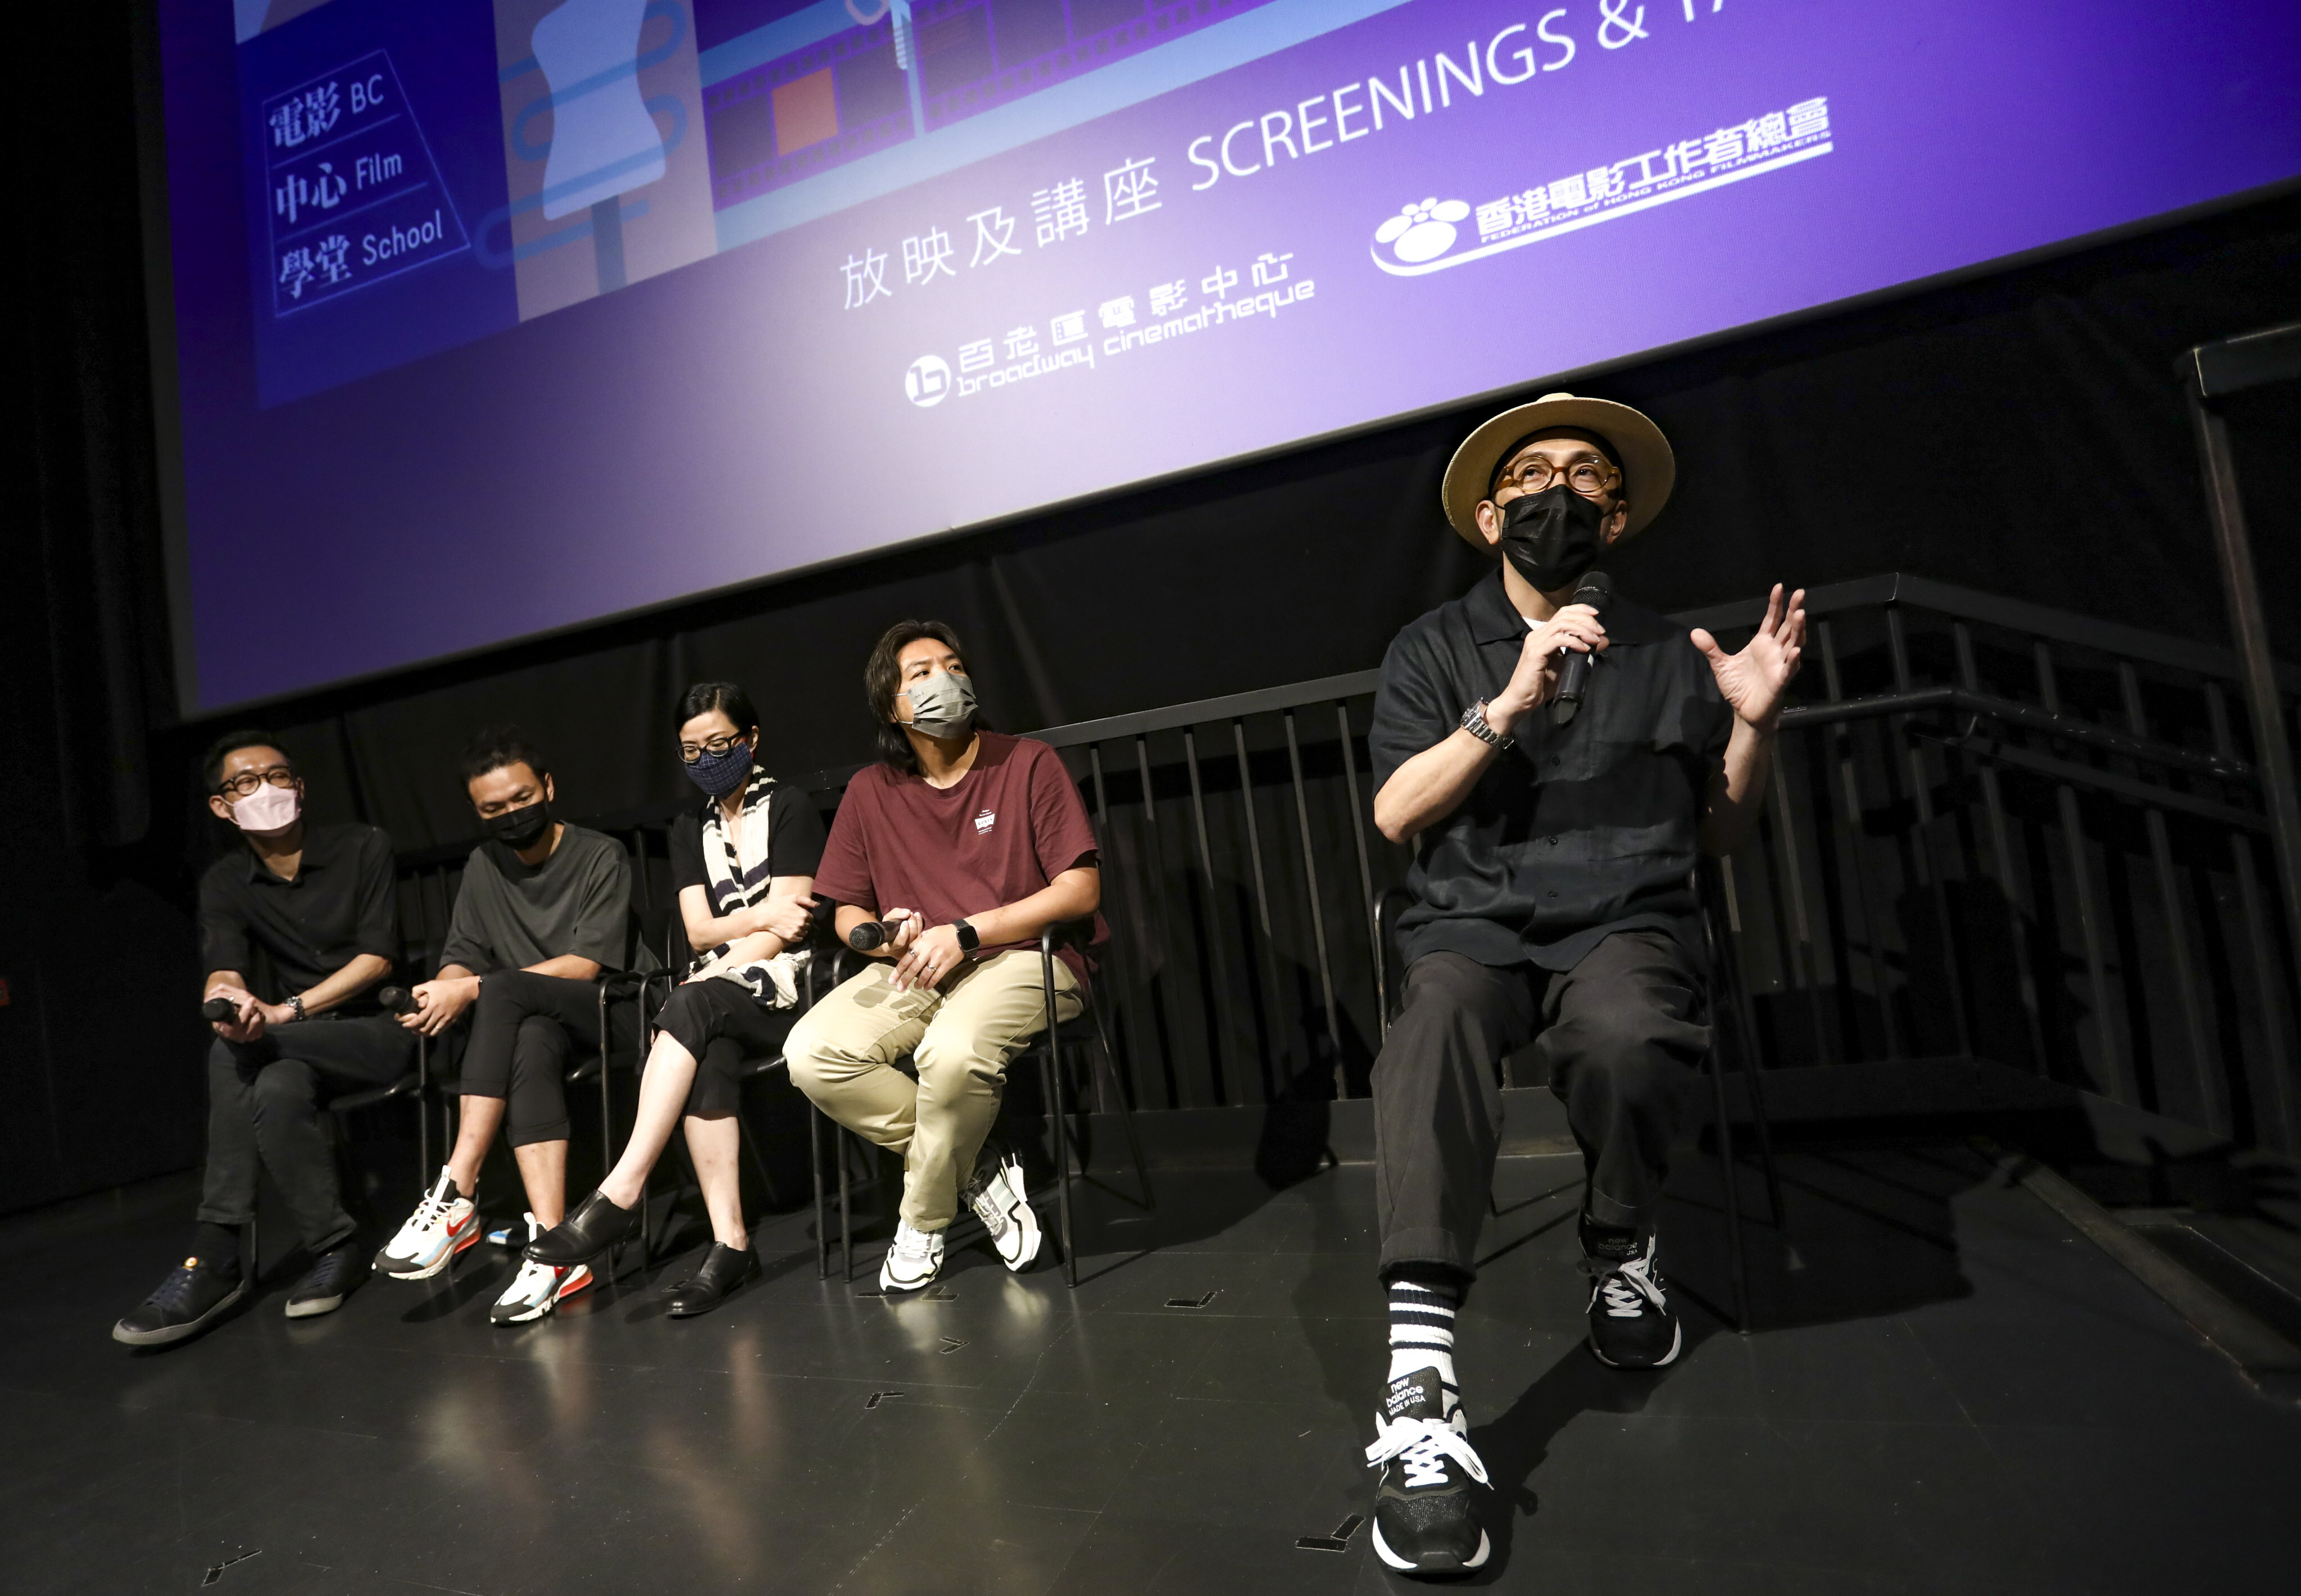 From left: BC director Clarence Tsui, art director Bly Li, costume designer Miggy Cheng, director of short film production and costume design Thomas Lee Chi-wai, and film art director Silver Cheung, speaking at BC Film School Offscreen Heroes’ Production and Costume Design talk. Photo: Jonathan 